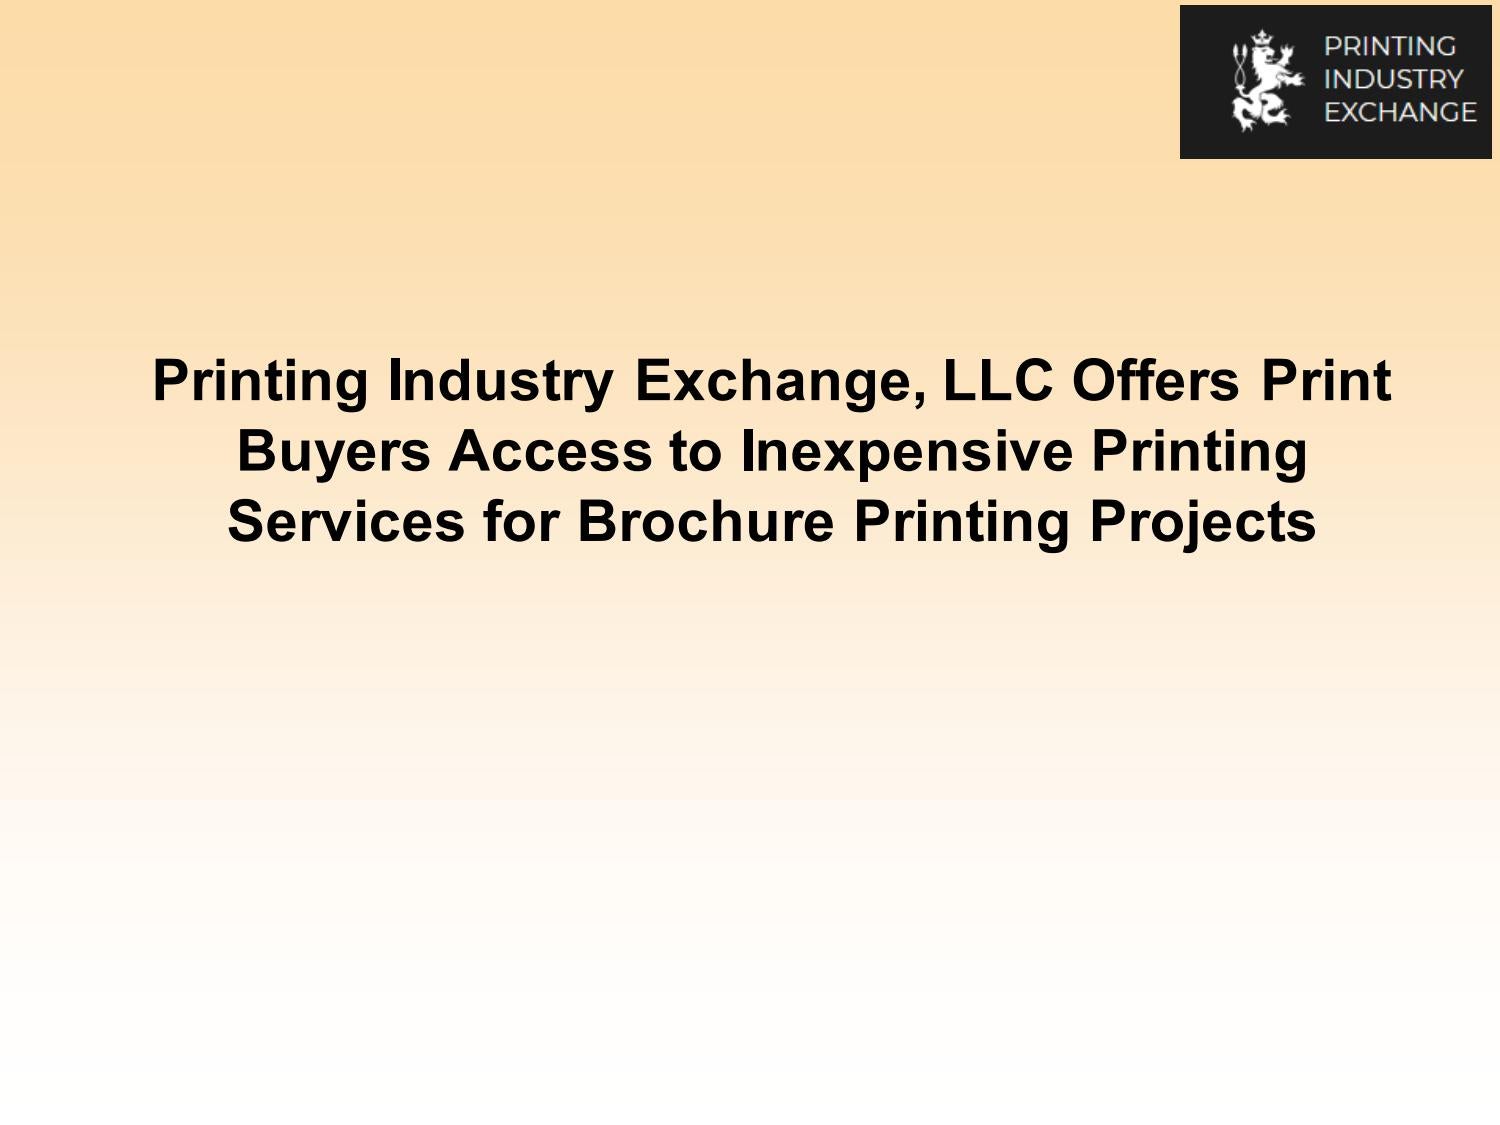 Printing Industry Exchange, LLC Offers Access to Affordable Printing Services Online 5